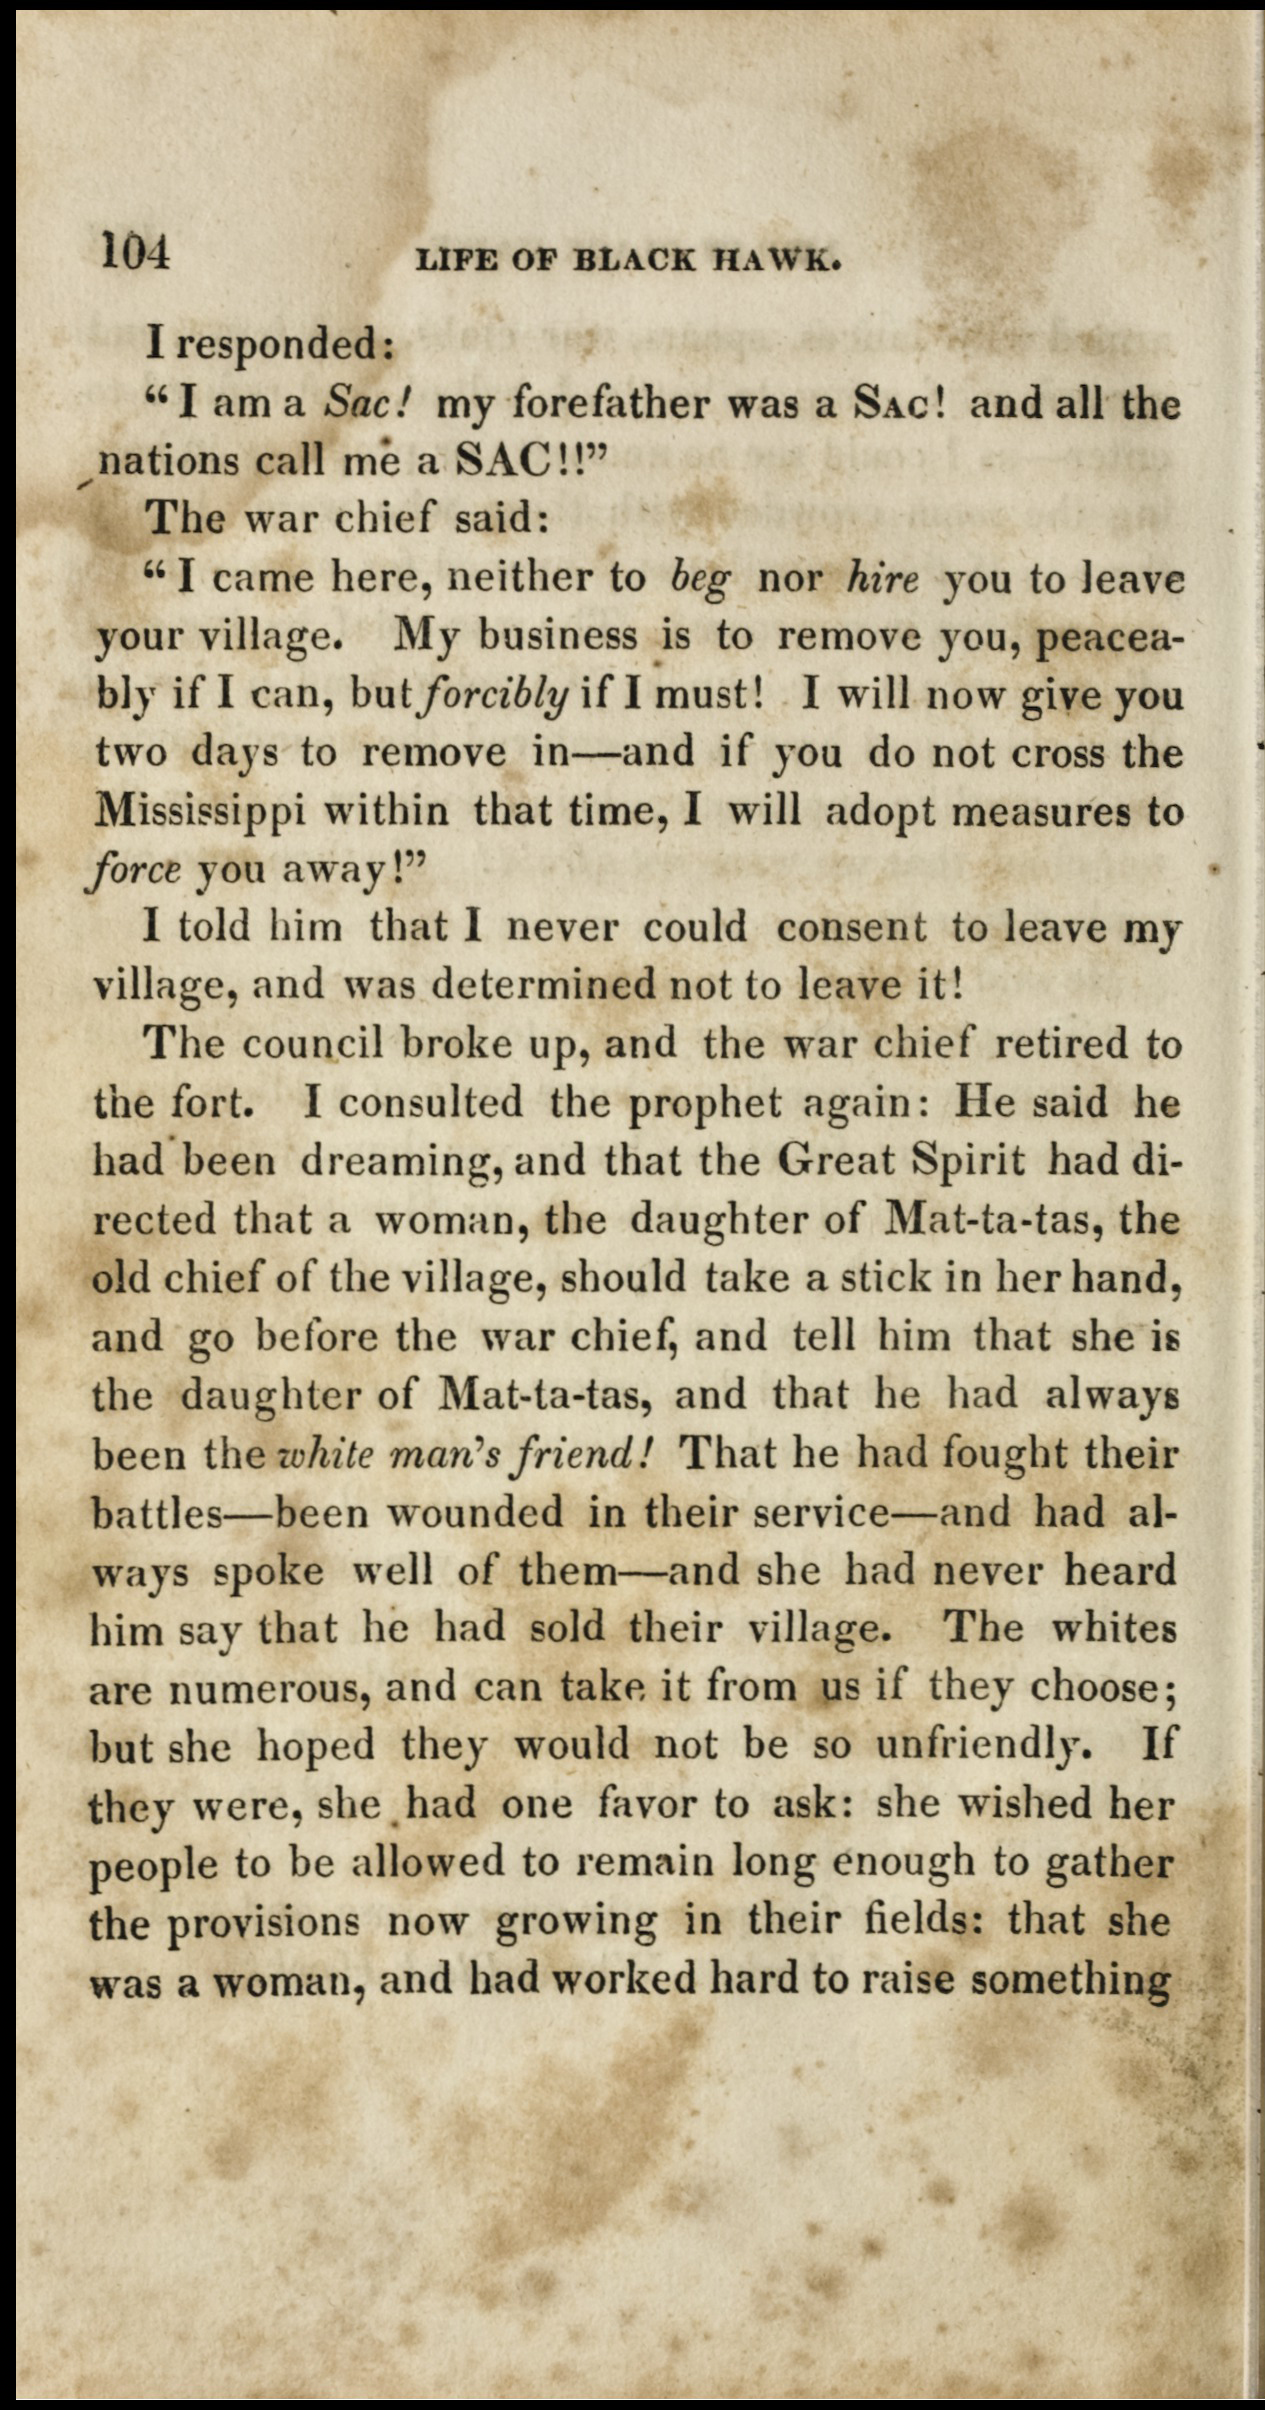 Page of printed text on aged, stained paper. Text reads, "I responded 'I am a Sac! My forefather was a Sac! And all the nations call me a SAC!!' The war chief said: 'I came here, neither to beg nor hire you to leave your village. My business is to remove you, peaceably if I can, but forcibly if I must! I will now give you two days to remove in--and if you do not cross the Mississippi within that time, I will adopt measures to force you away!' I told him that I never could consent to leave my village, and was determined not to leave it!"